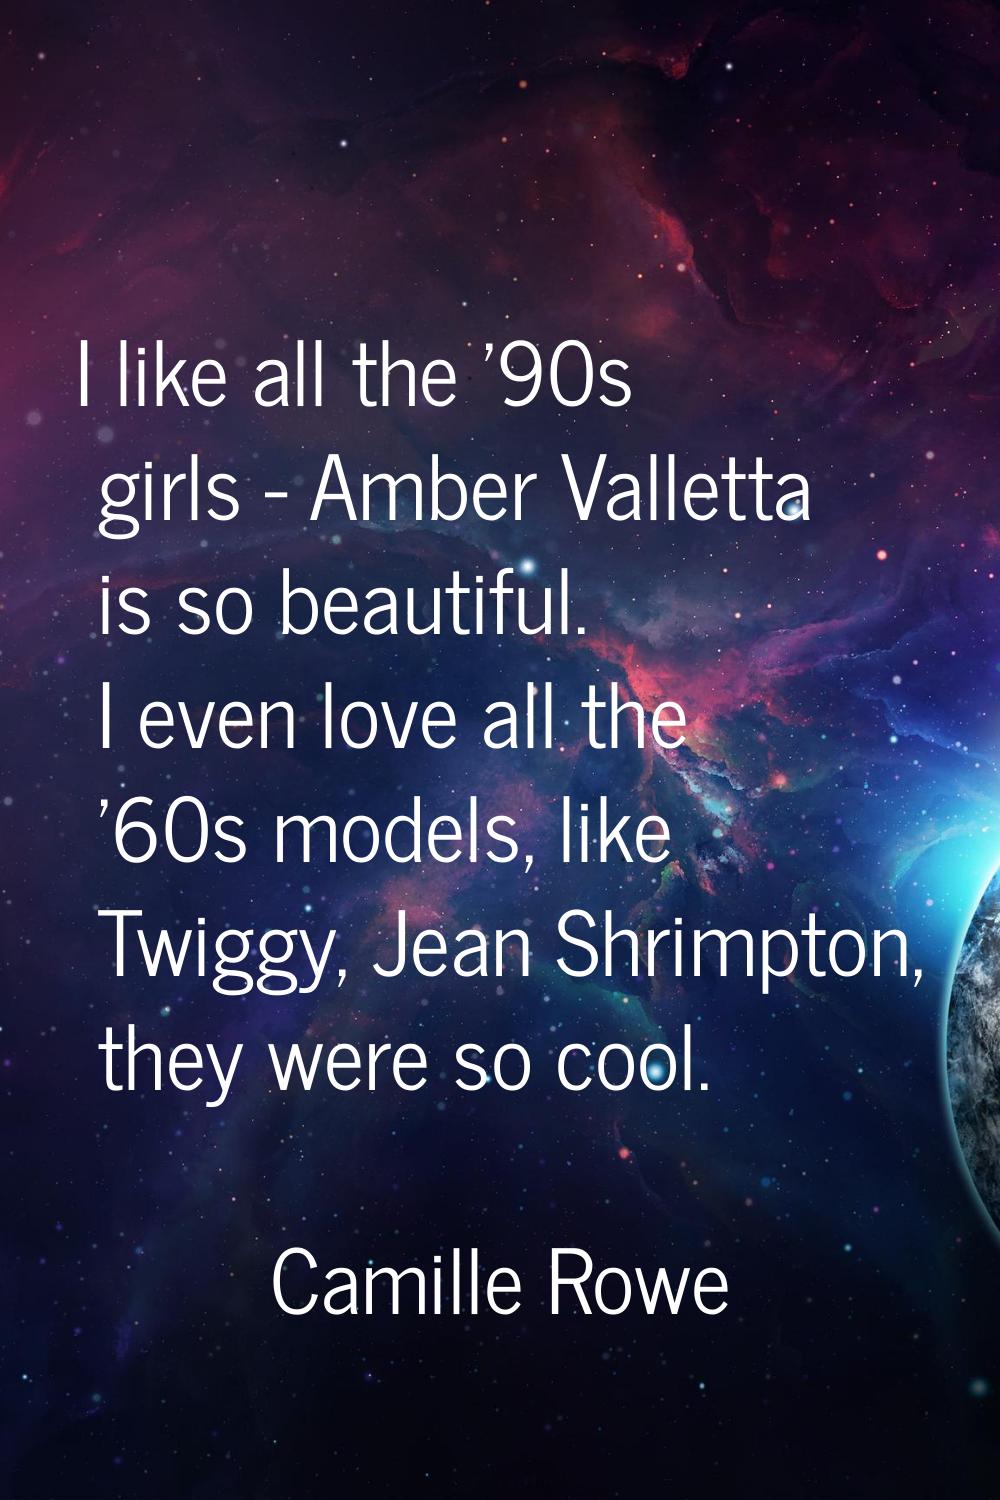 I like all the '90s girls - Amber Valletta is so beautiful. I even love all the '60s models, like T